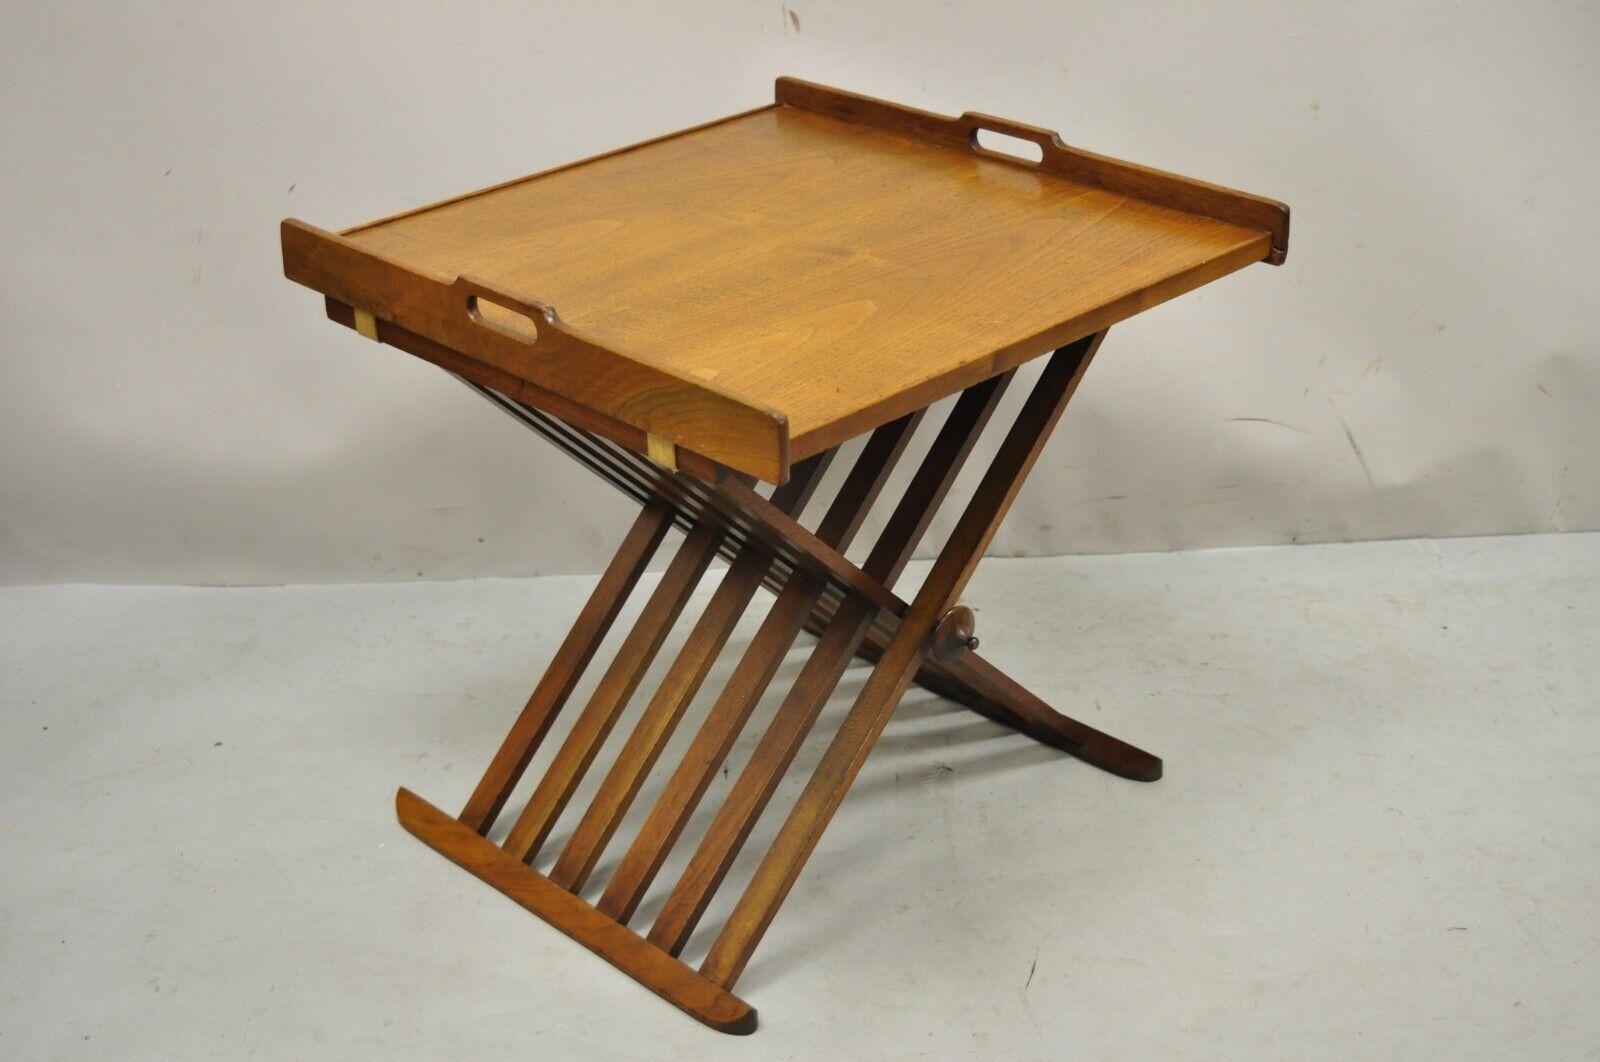 Stewart MacDougall Kipp Stewart Drexel Walnut Folding Campaign Table (B). Item features removable tray top, folding X-form base, carved finials. Circa mid 20th century. Measurements: 20